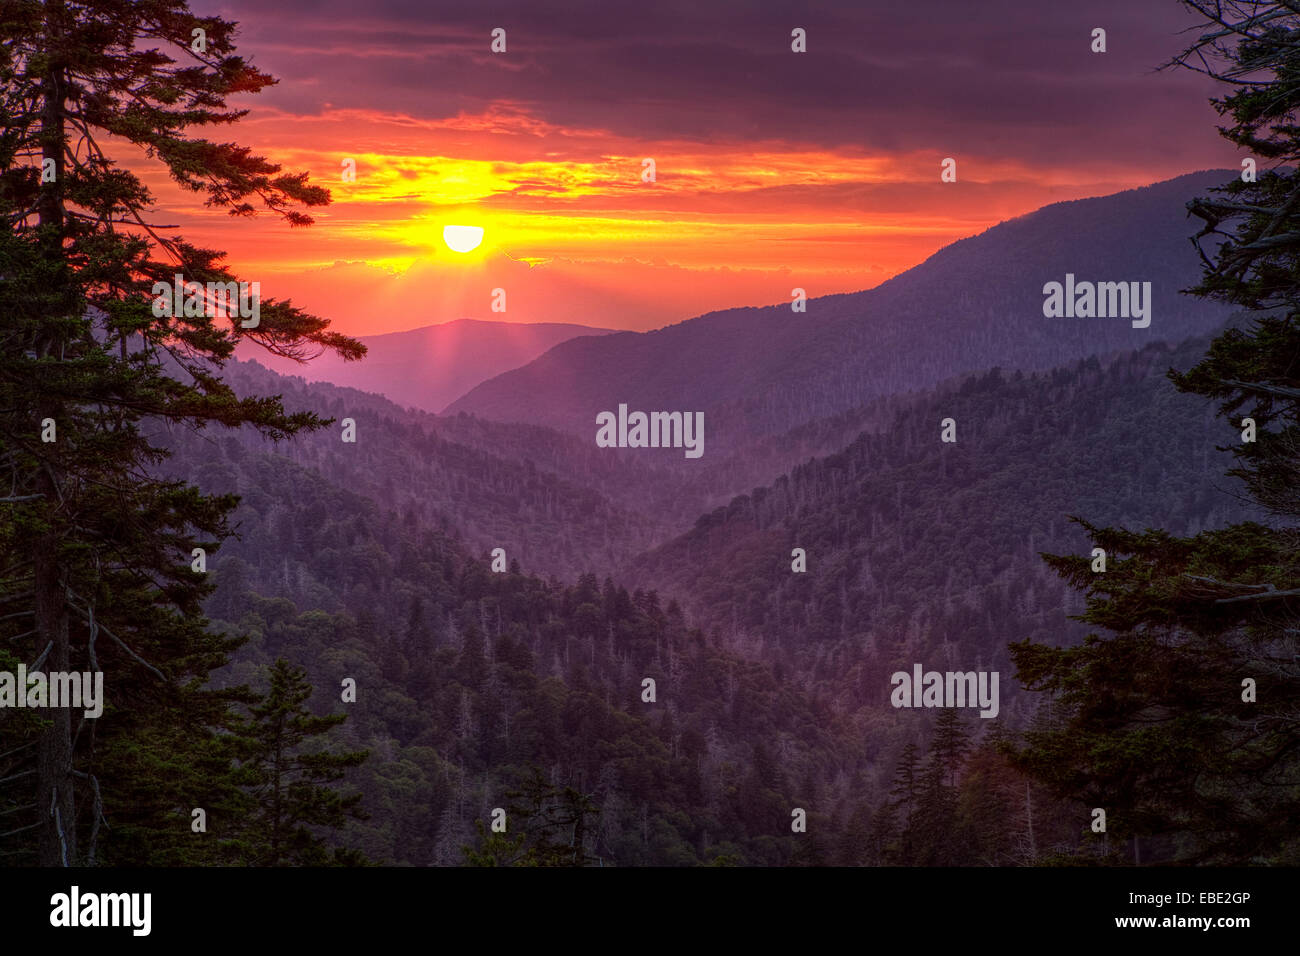 A dramatic sunset over mountain ridges framed between evergreen trees at an overloook in the Great Smoky Mountain National Park. Stock Photo